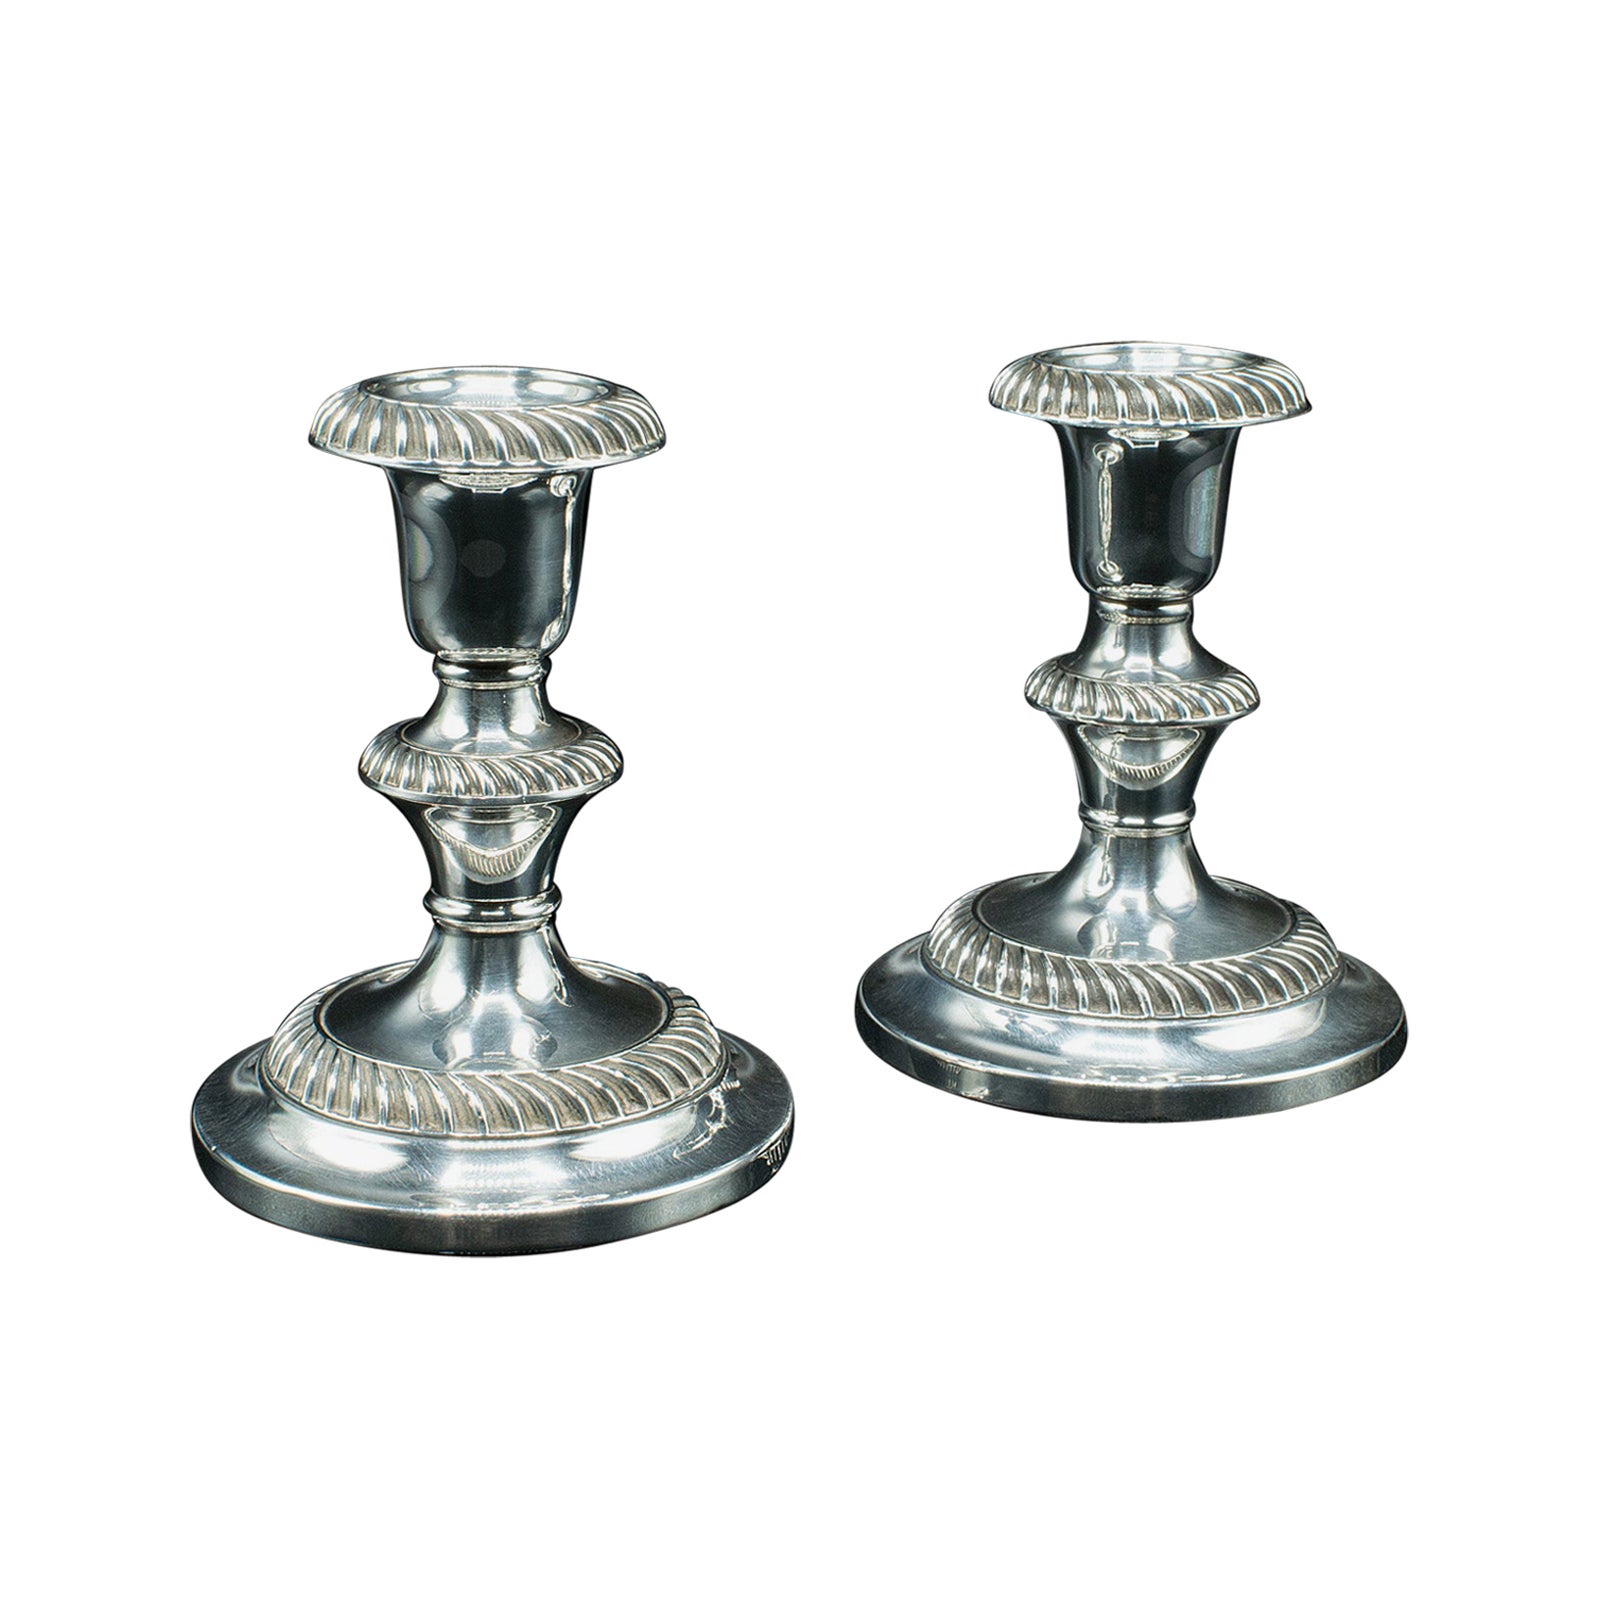 Pair Of Antique Candlesticks, English, Silver Plate, Candle Sconce, Edwardian For Sale